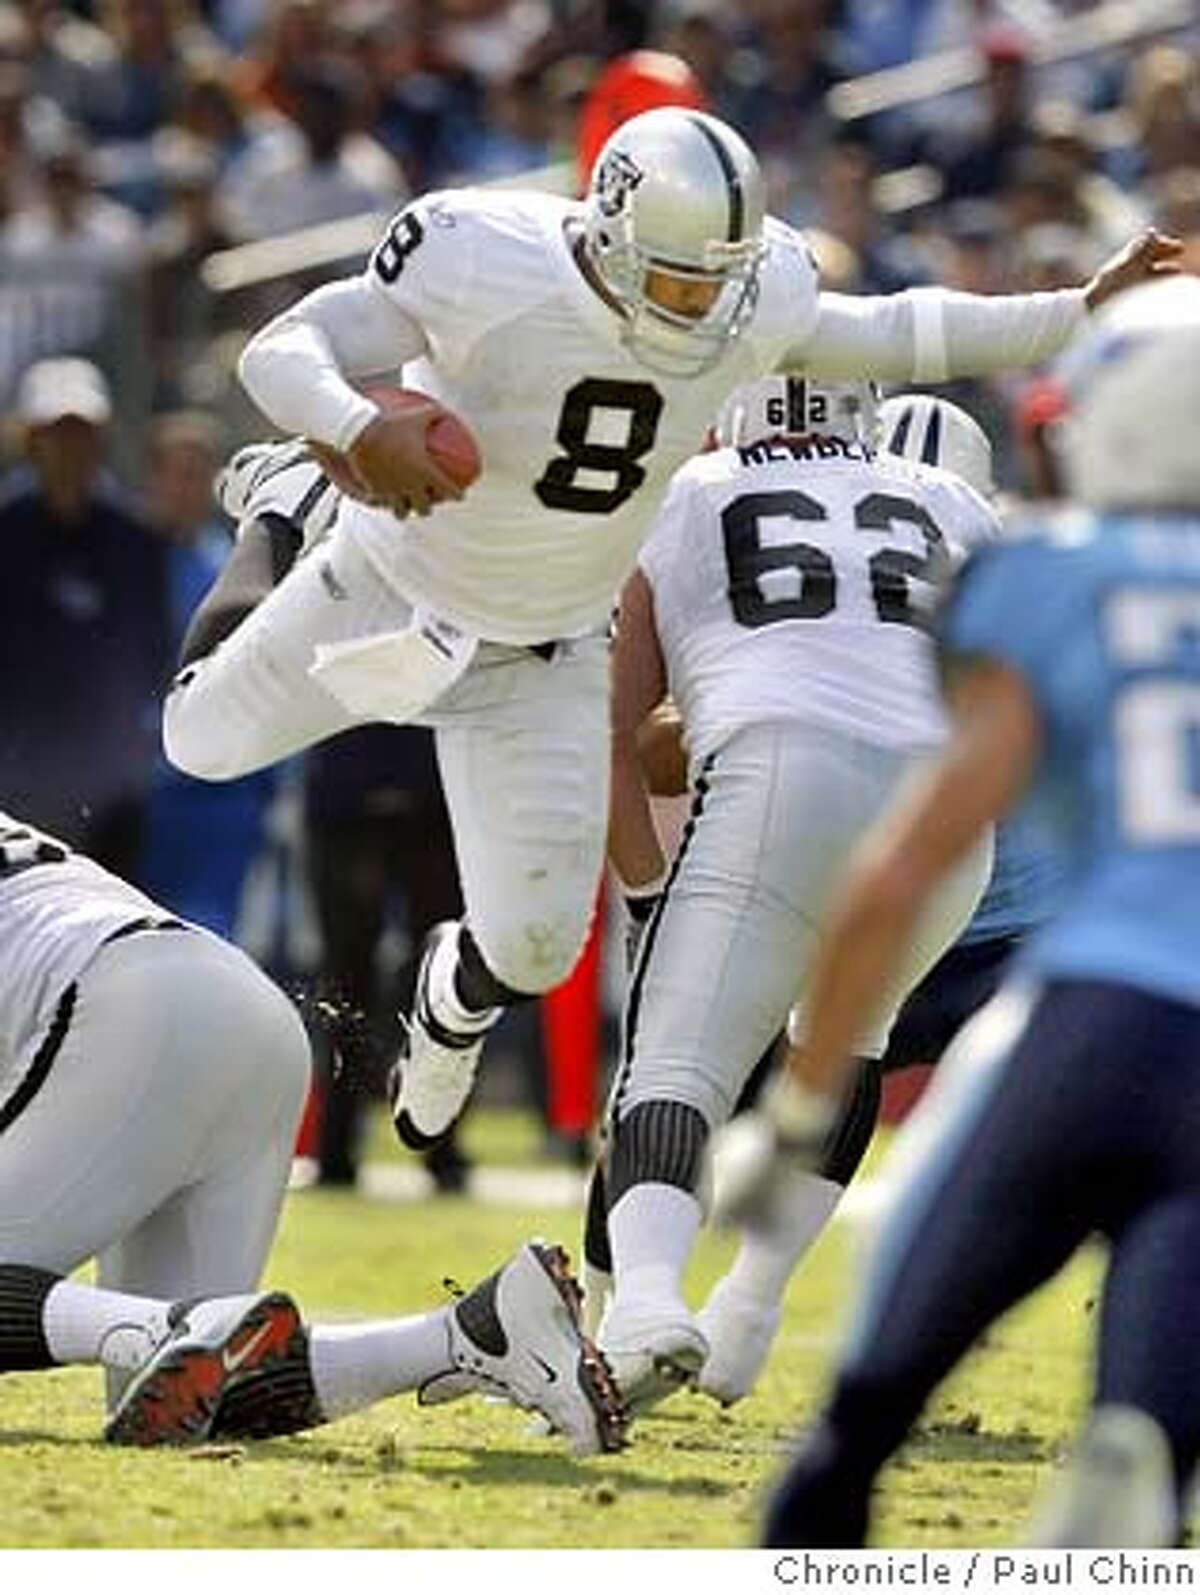 Quarterback leaps over linemen while scrambling in the second quarter of the Oakland Raider vs. Tennessee Titans NFL game at LP Field in Nashville, Tenn. on Sunday, Oct. 28, 2007. PAUL CHINN/The Chronicle